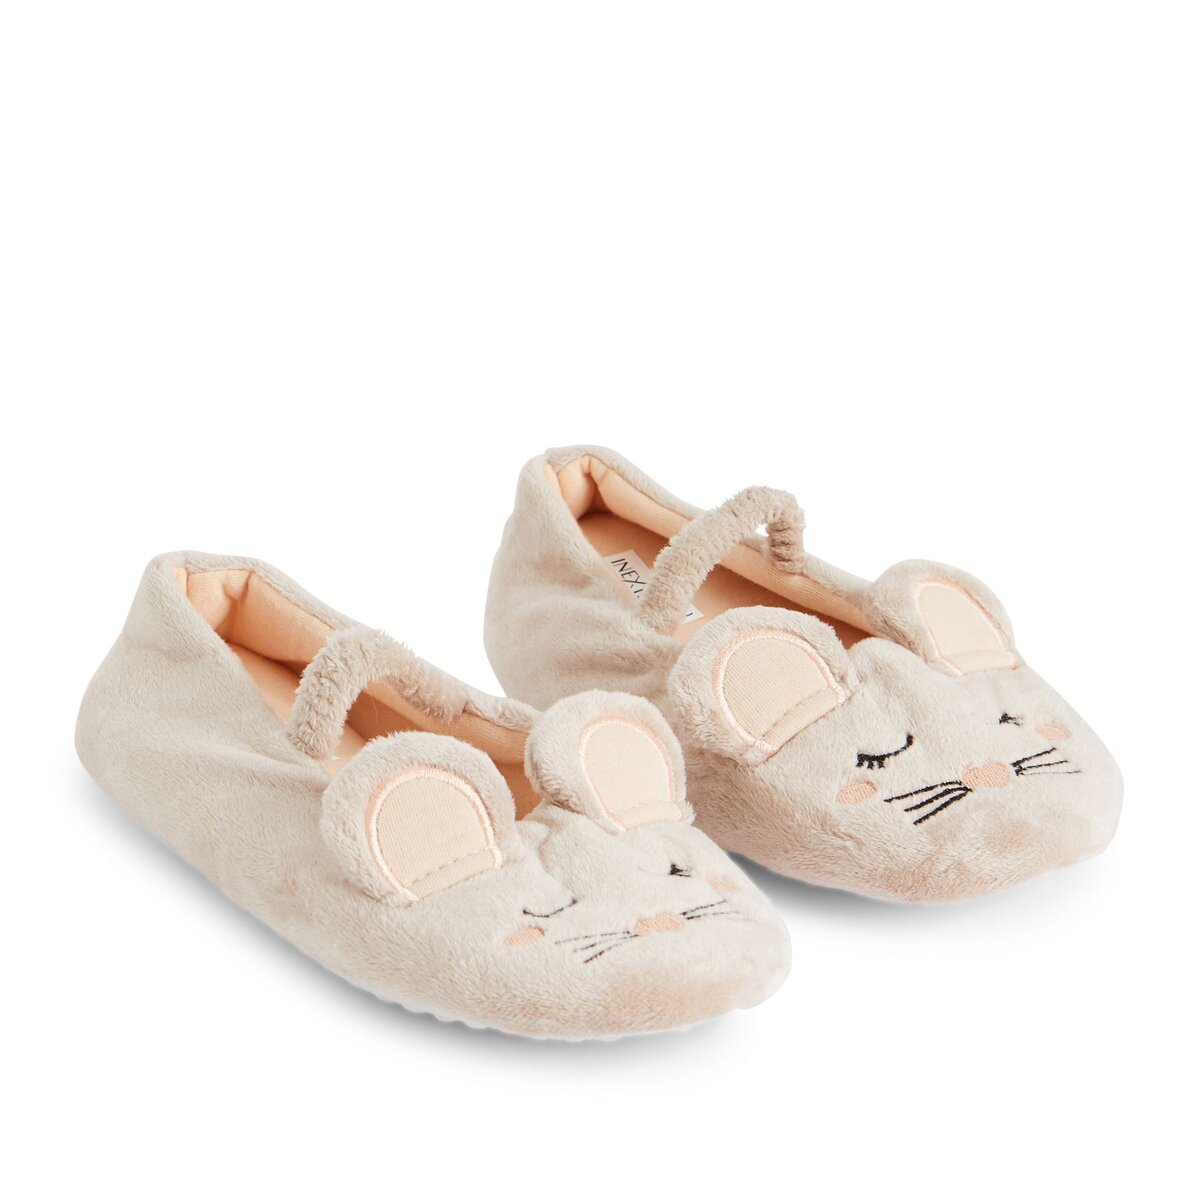 IN EXTENSO Chaussons souris fille